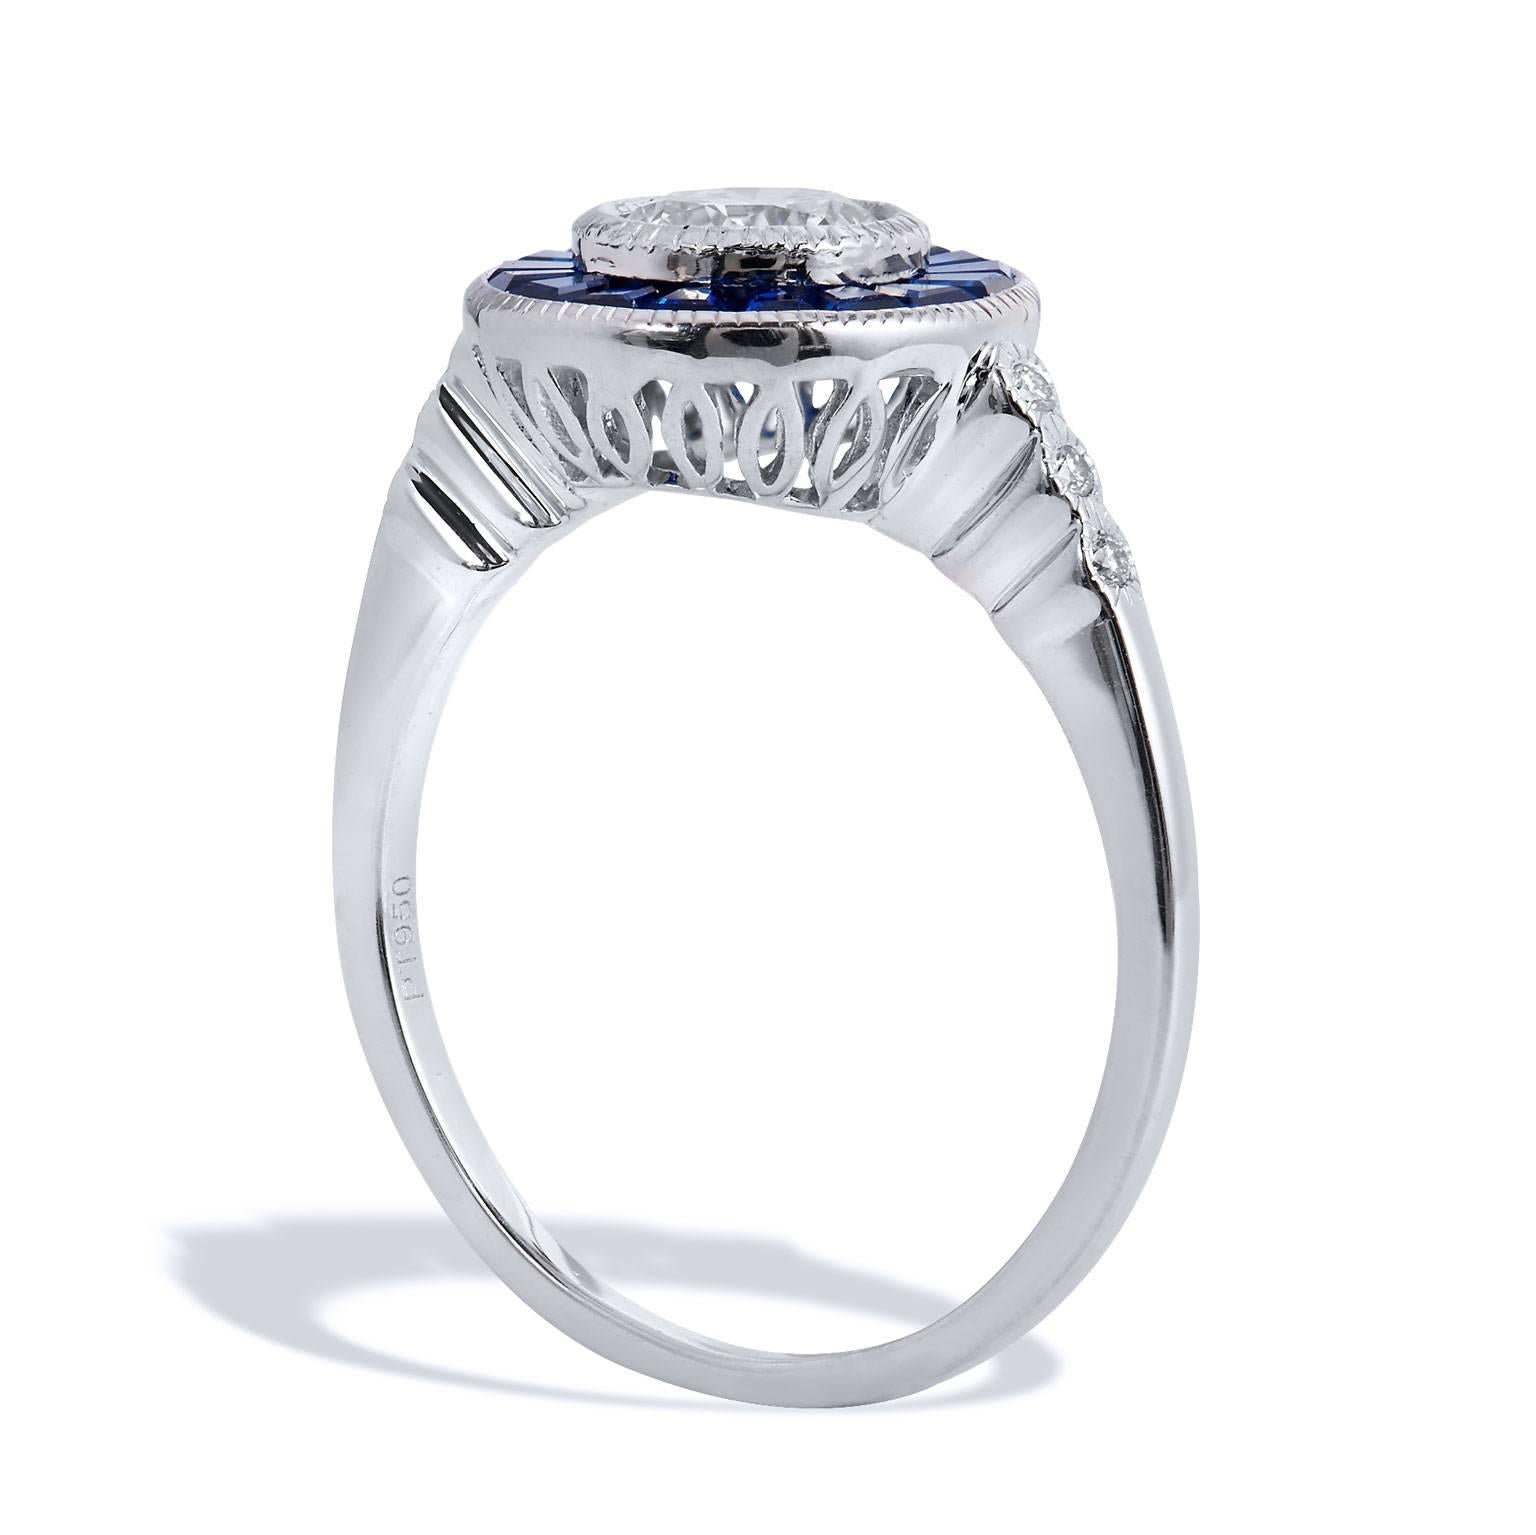 Crafted in platinum, this ring features a 0.63 carat I/SI1 graded Round Brilliant cut diamond set at center (GIA#6177461723) surrounded by 0.90 carat of caliber cut sapphires. The ring features a thin shank for a very soft and feminine feel that is